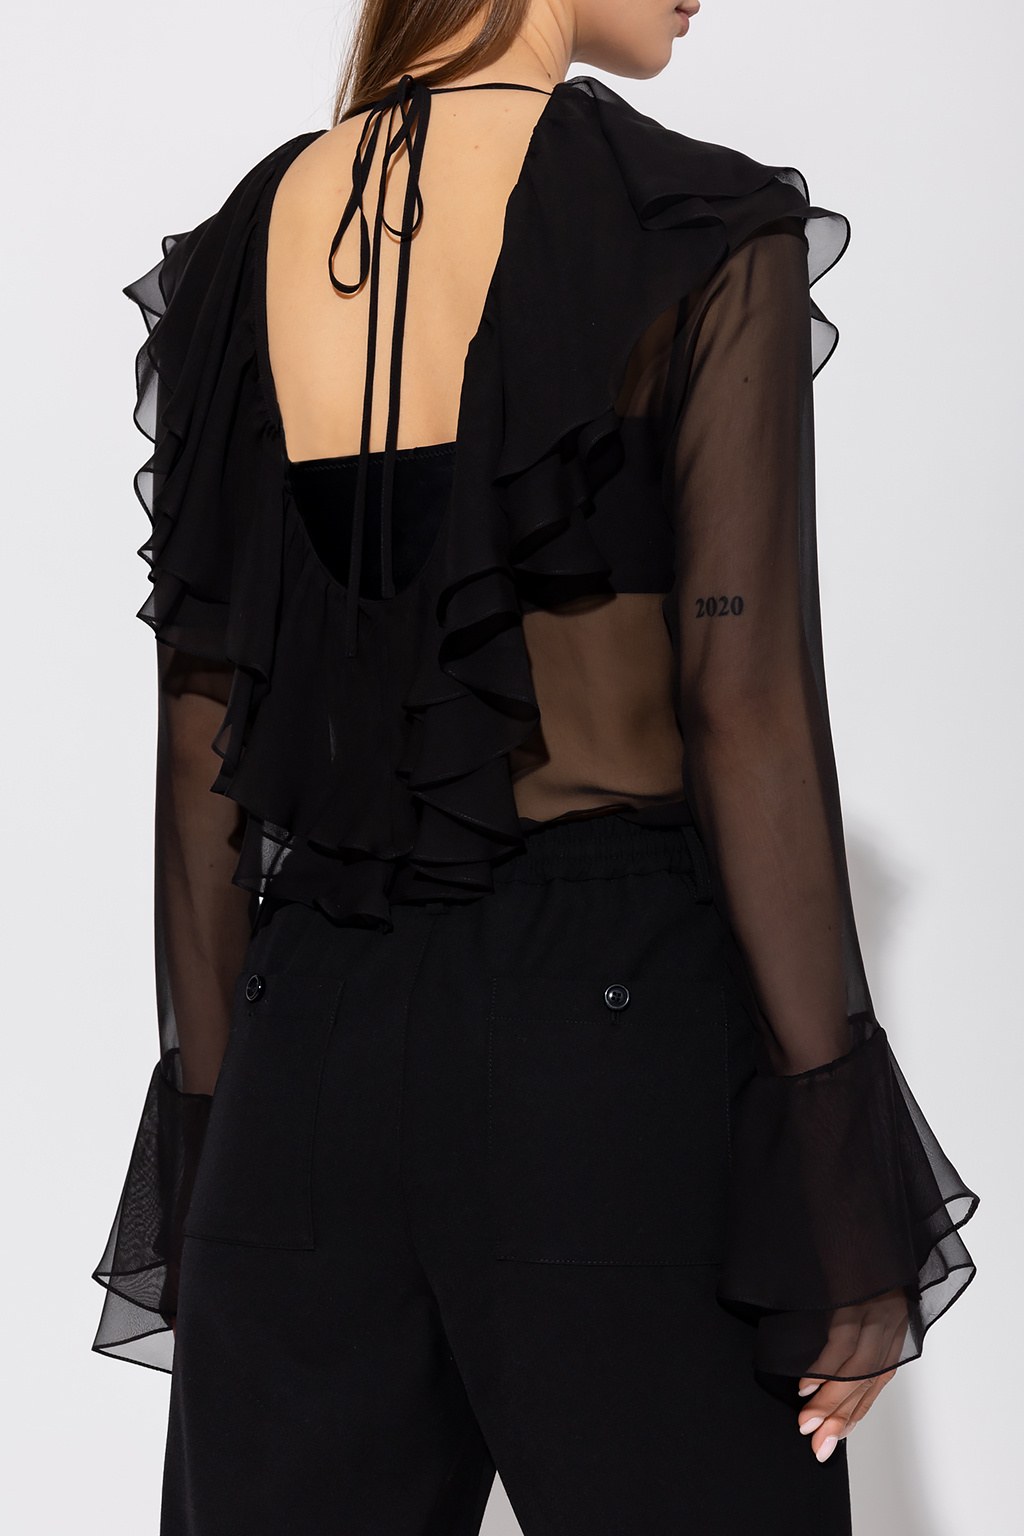 Frequently asked questions Sheer bodysuit with ruffles